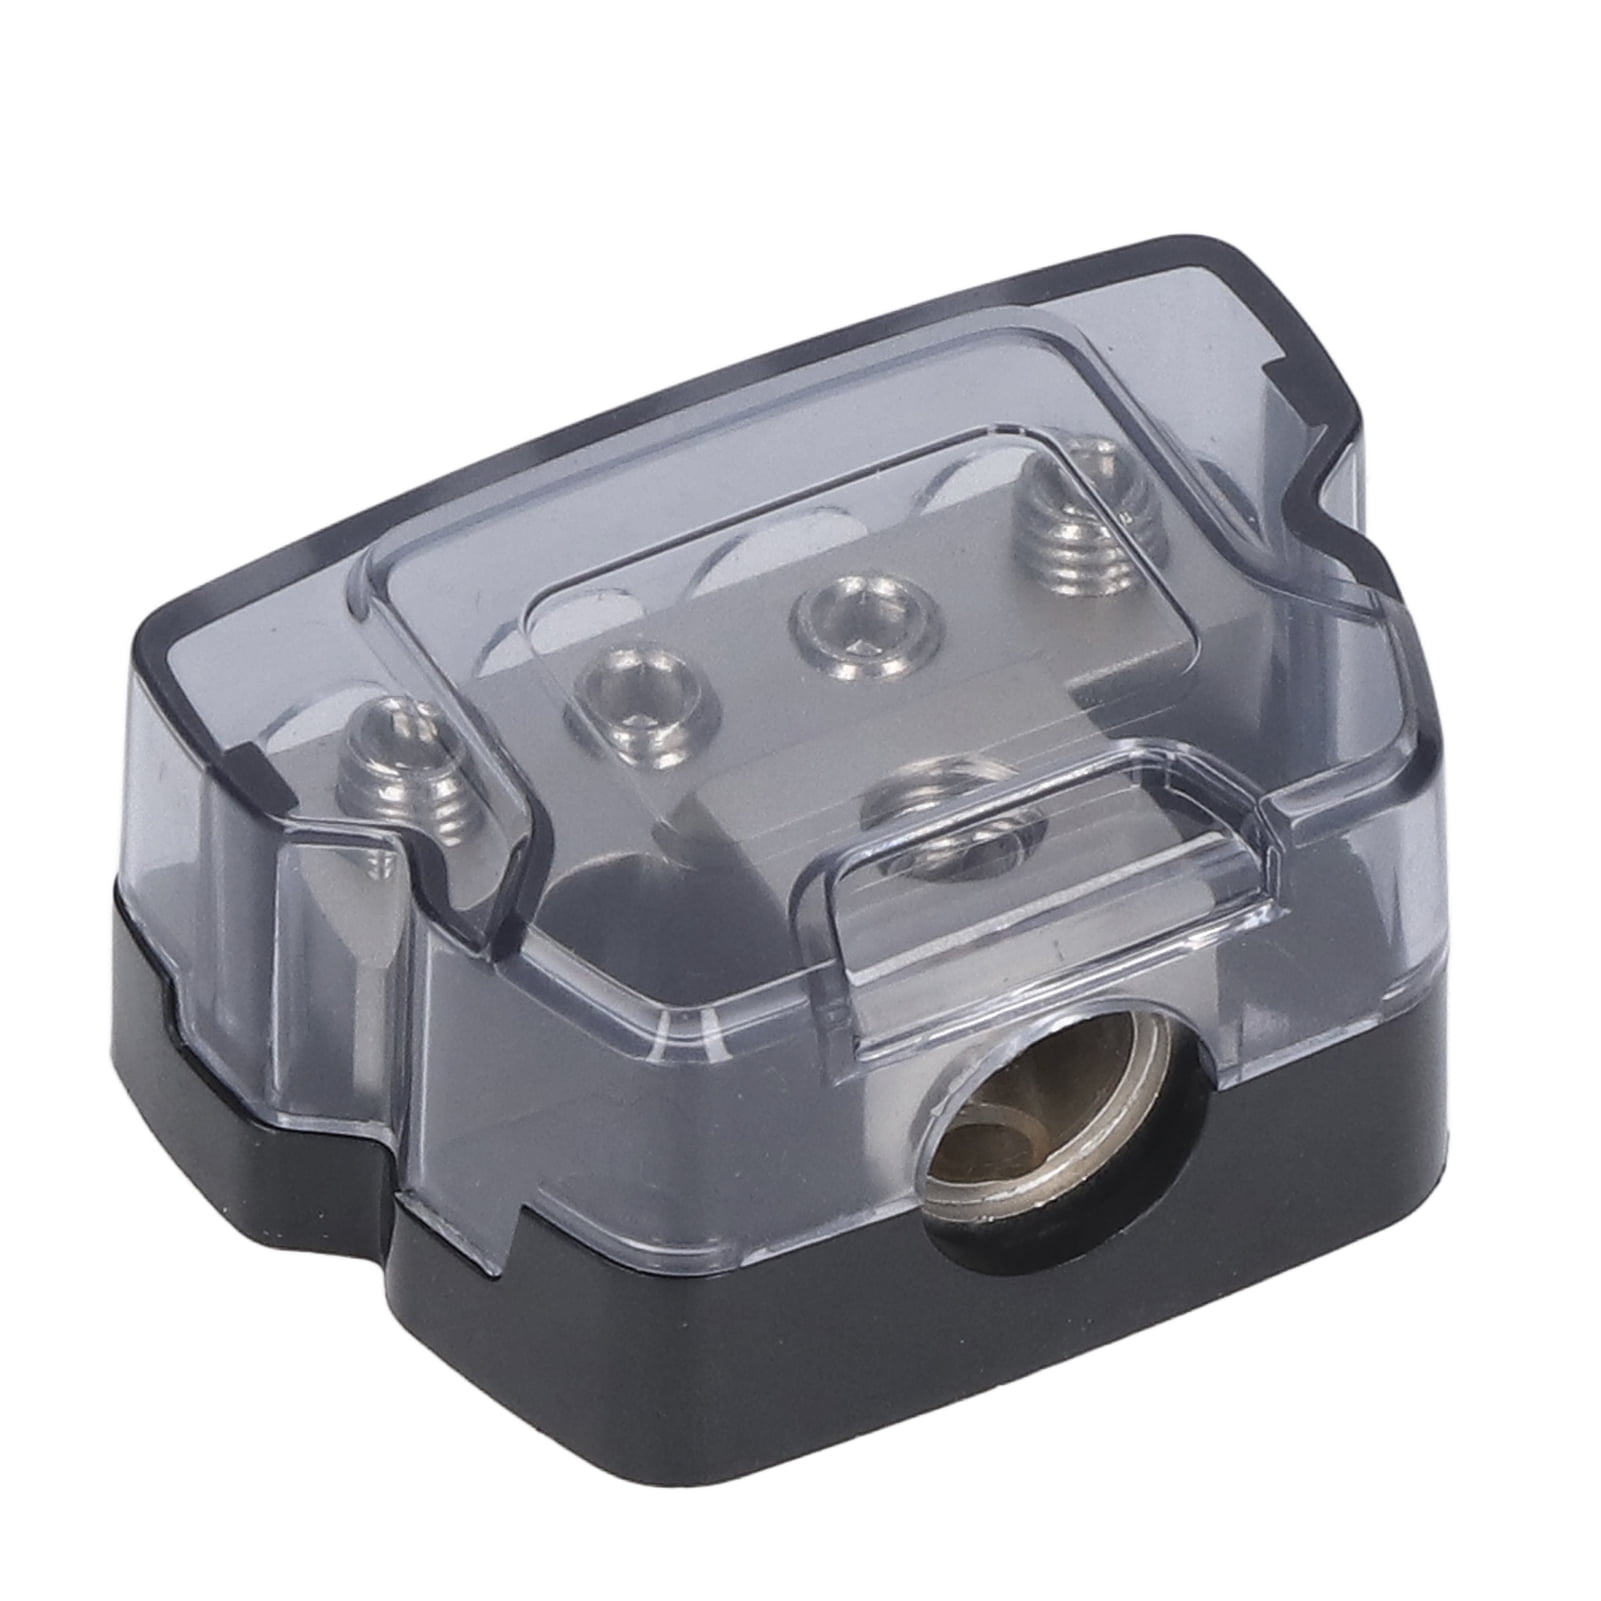 Car Audio Fuse Holder Distribution Block Car Stereo Audio Inline Auto Fuse Holder Distribution Block 0 2 4 AWG in 4 6 8 Gauge Out Clear Plastic Case 